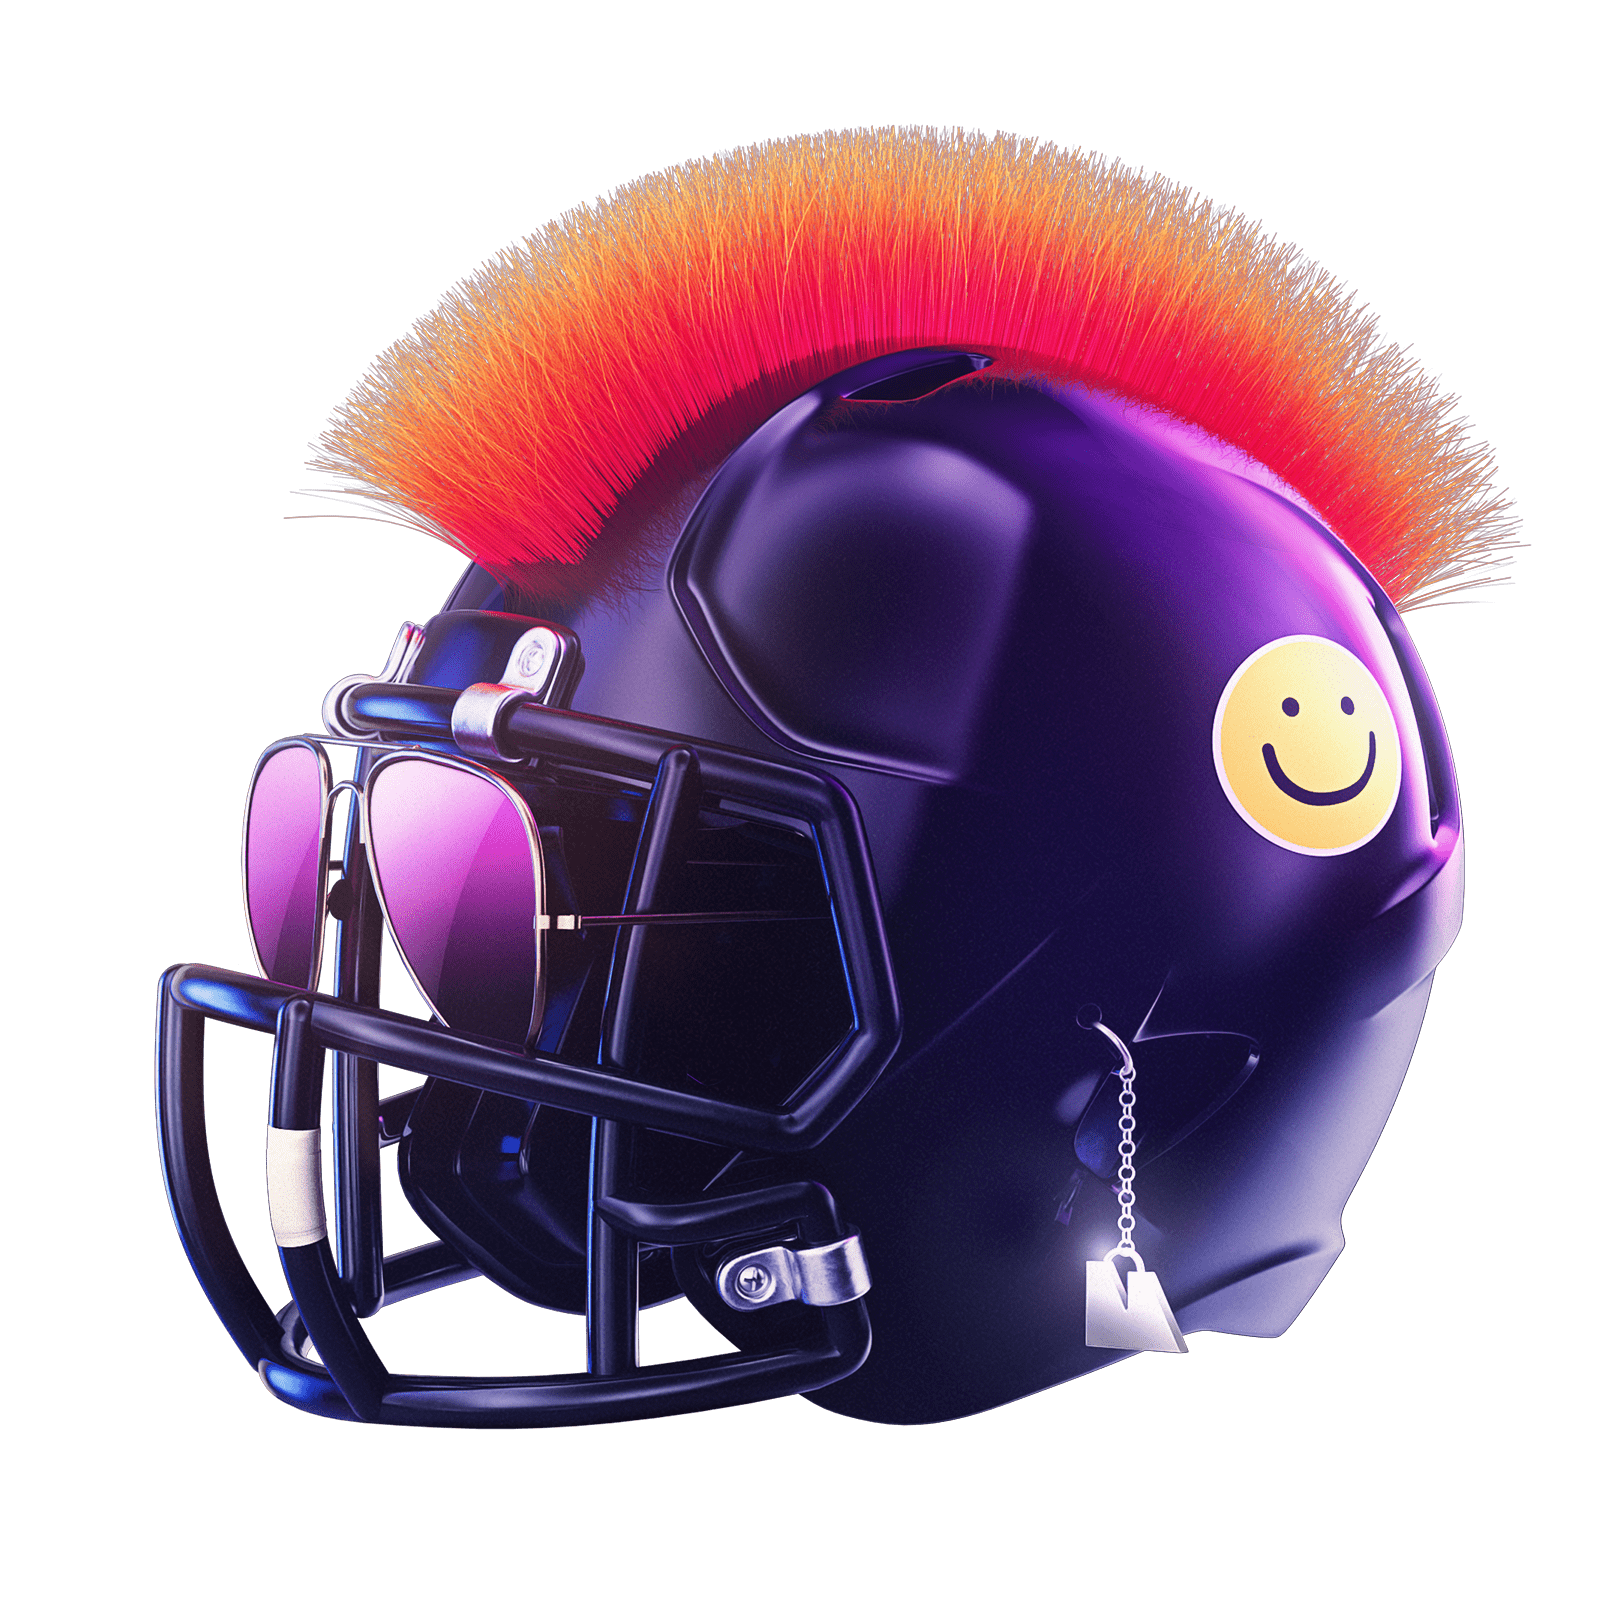 Football helmet with sunglasses and mohawk